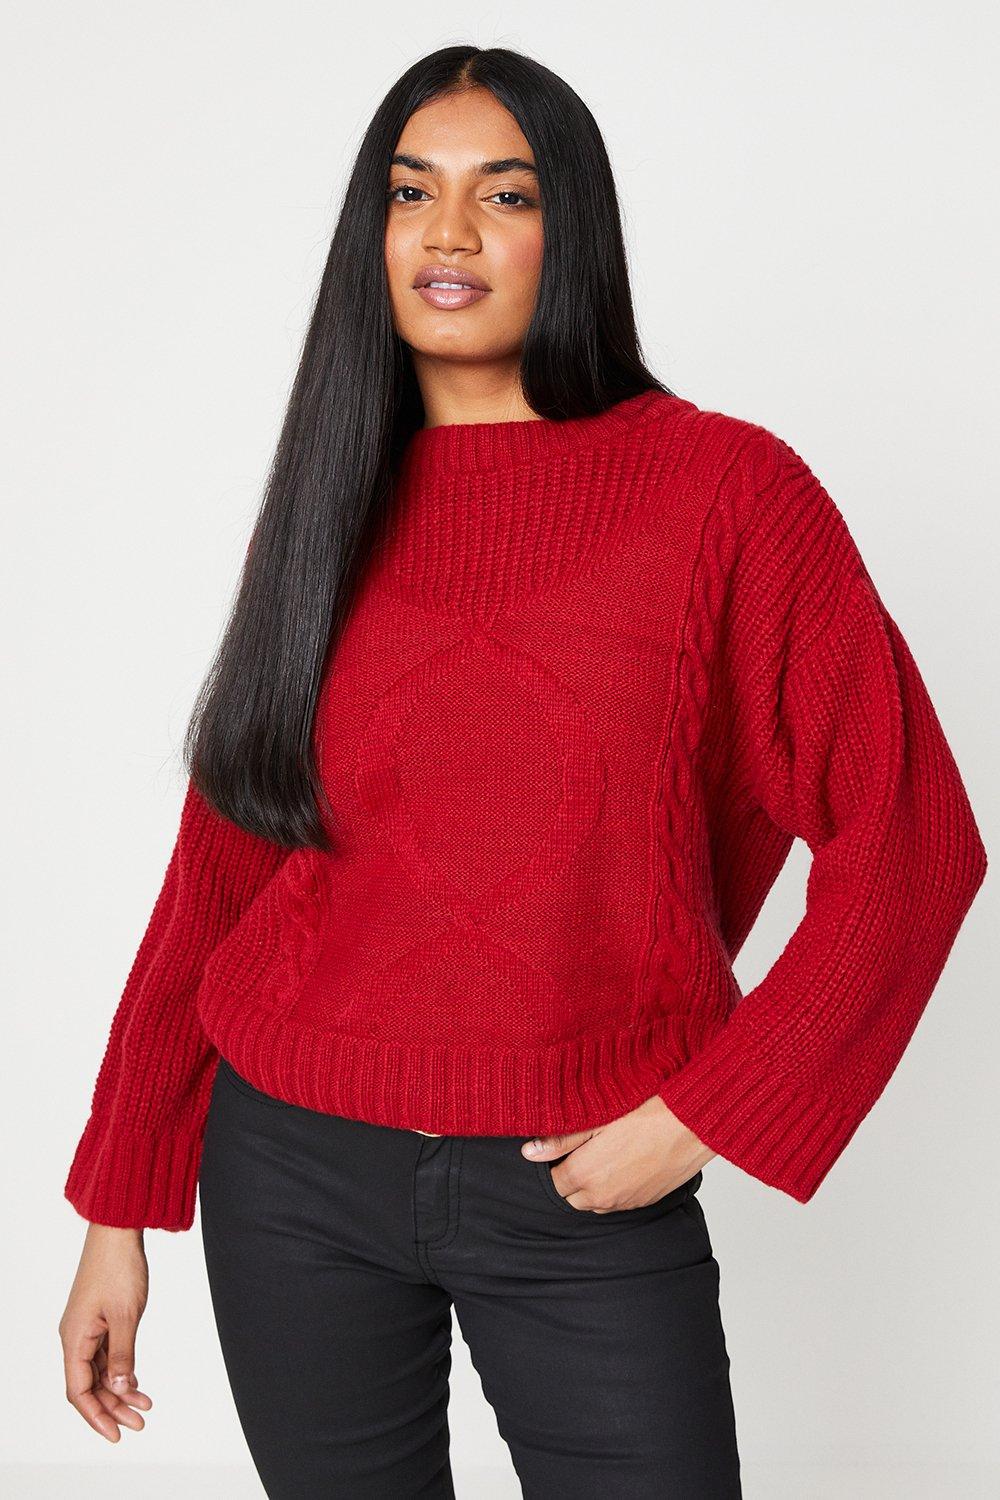 Women’s Petite Wide Sleeve Cable Fluffy Knit Jumper - red - L